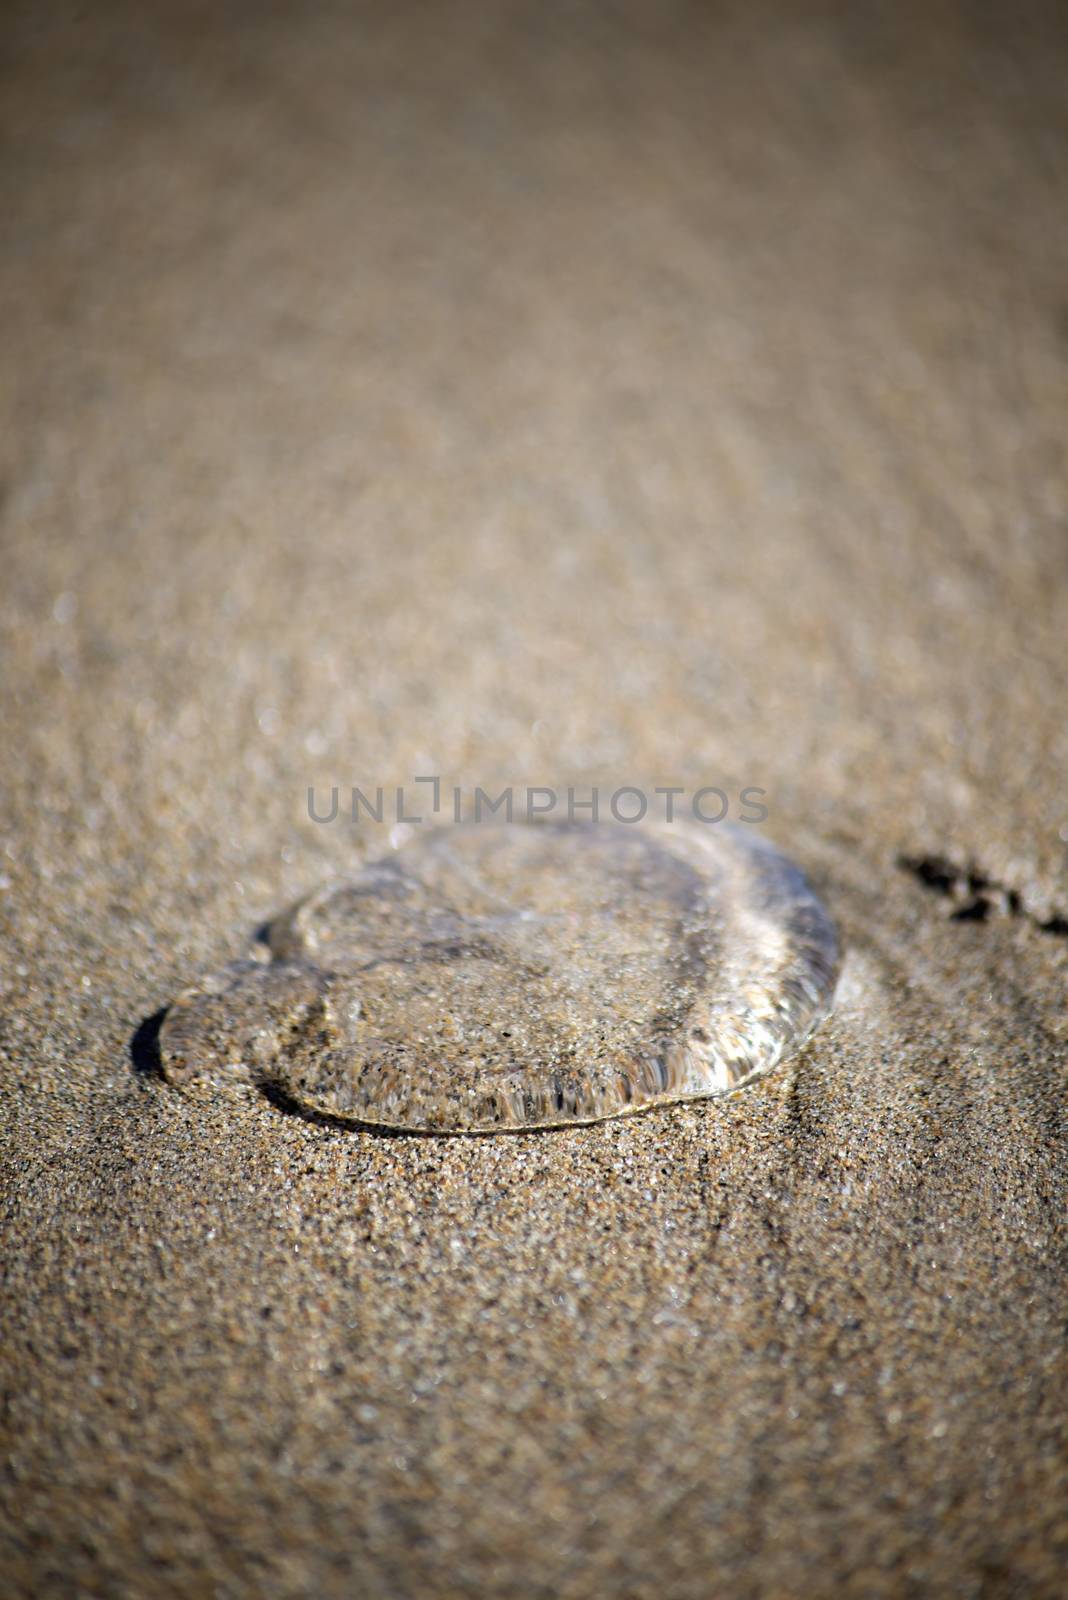 see through jellyfish in the sands of ireland